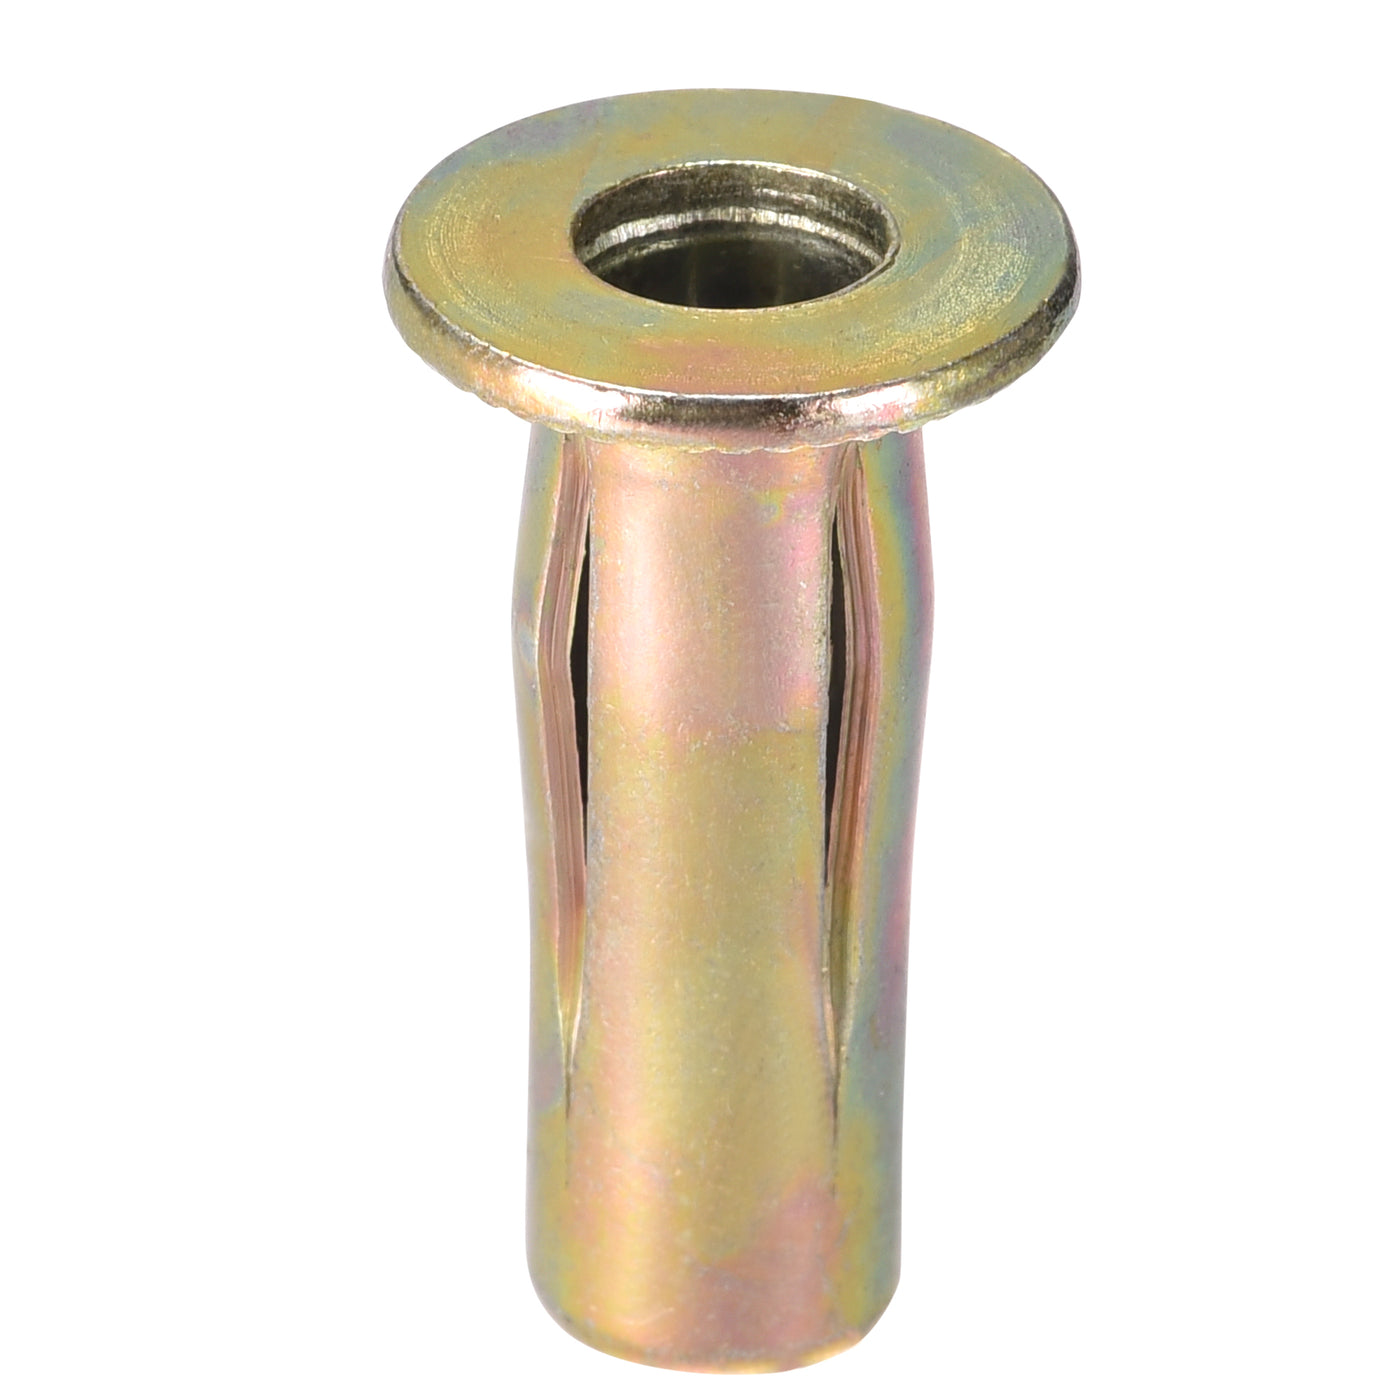 uxcell Uxcell Multi-Grip Rivet-Nut, Pre-Bulbed Shank Carbon Steel for Anti-Rotation